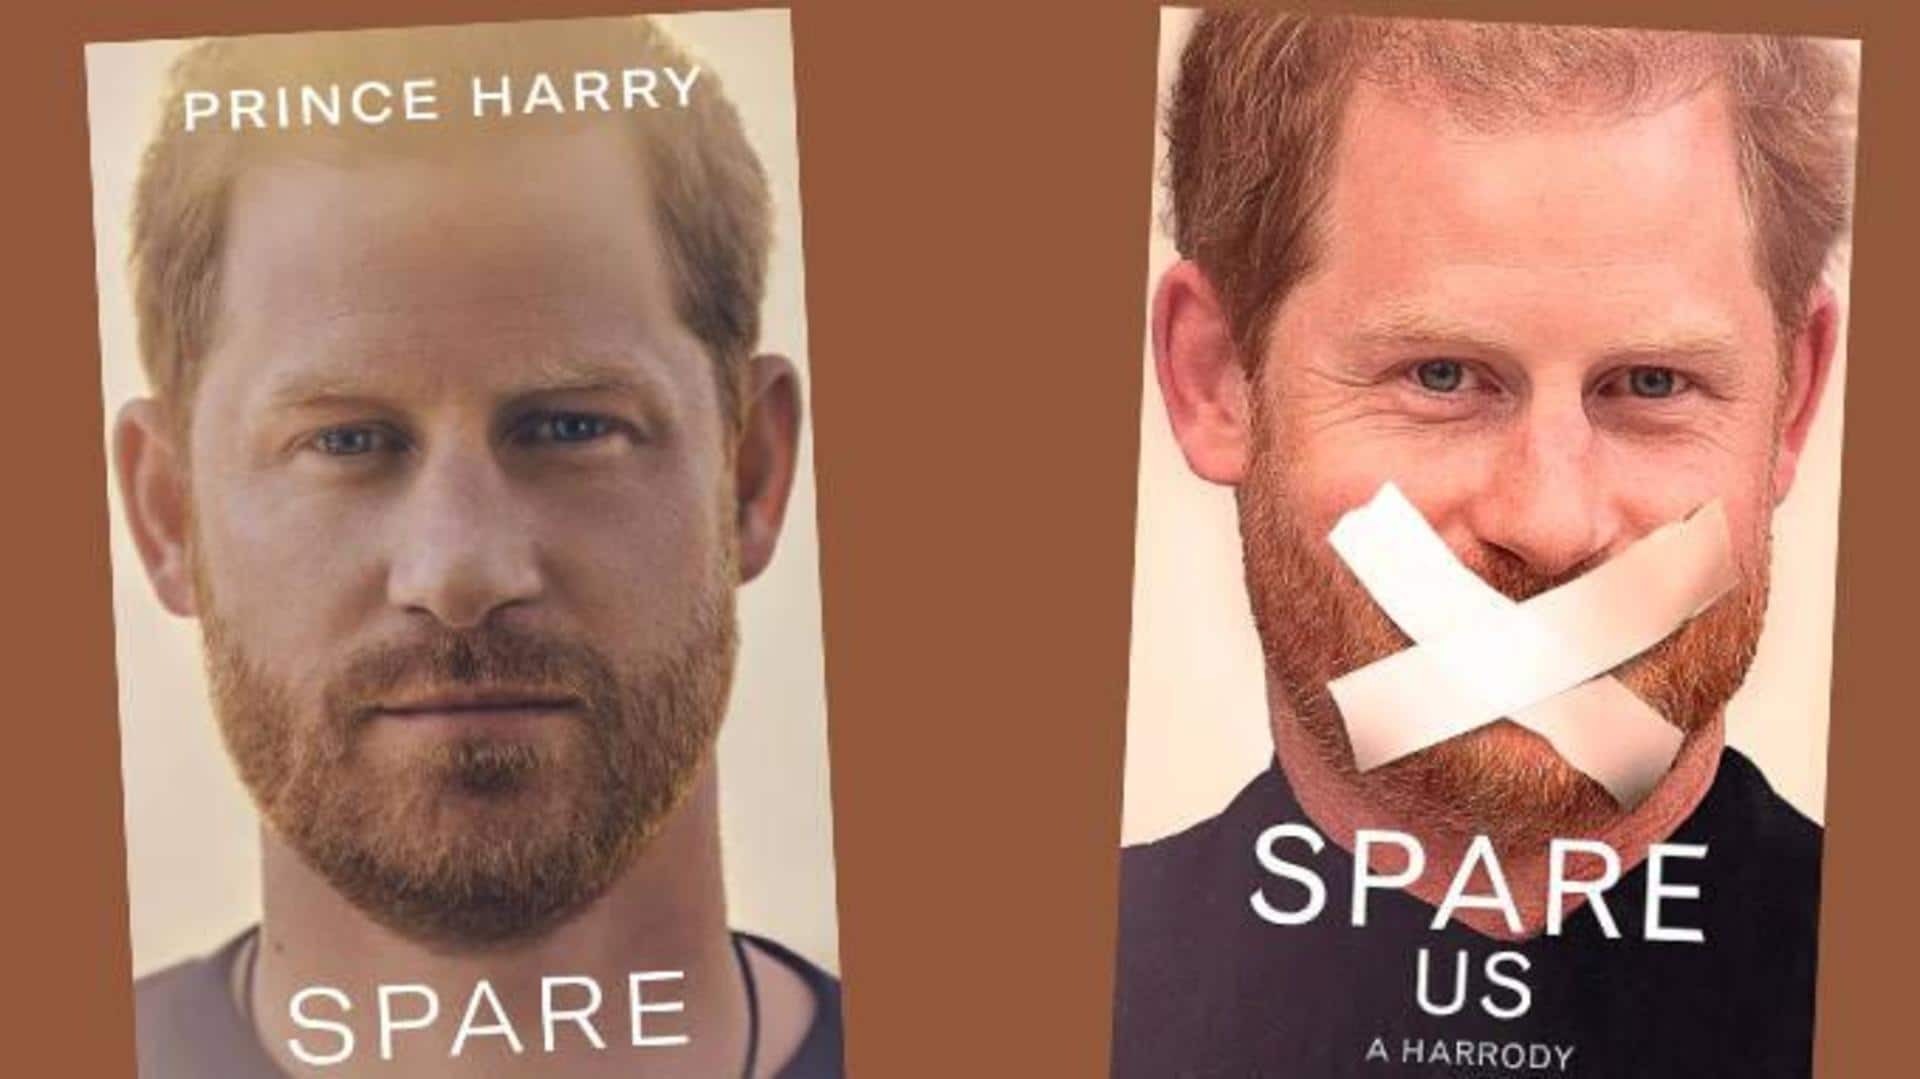 'Spare Us!': Parody on Prince Harry's 'Spare' out in April